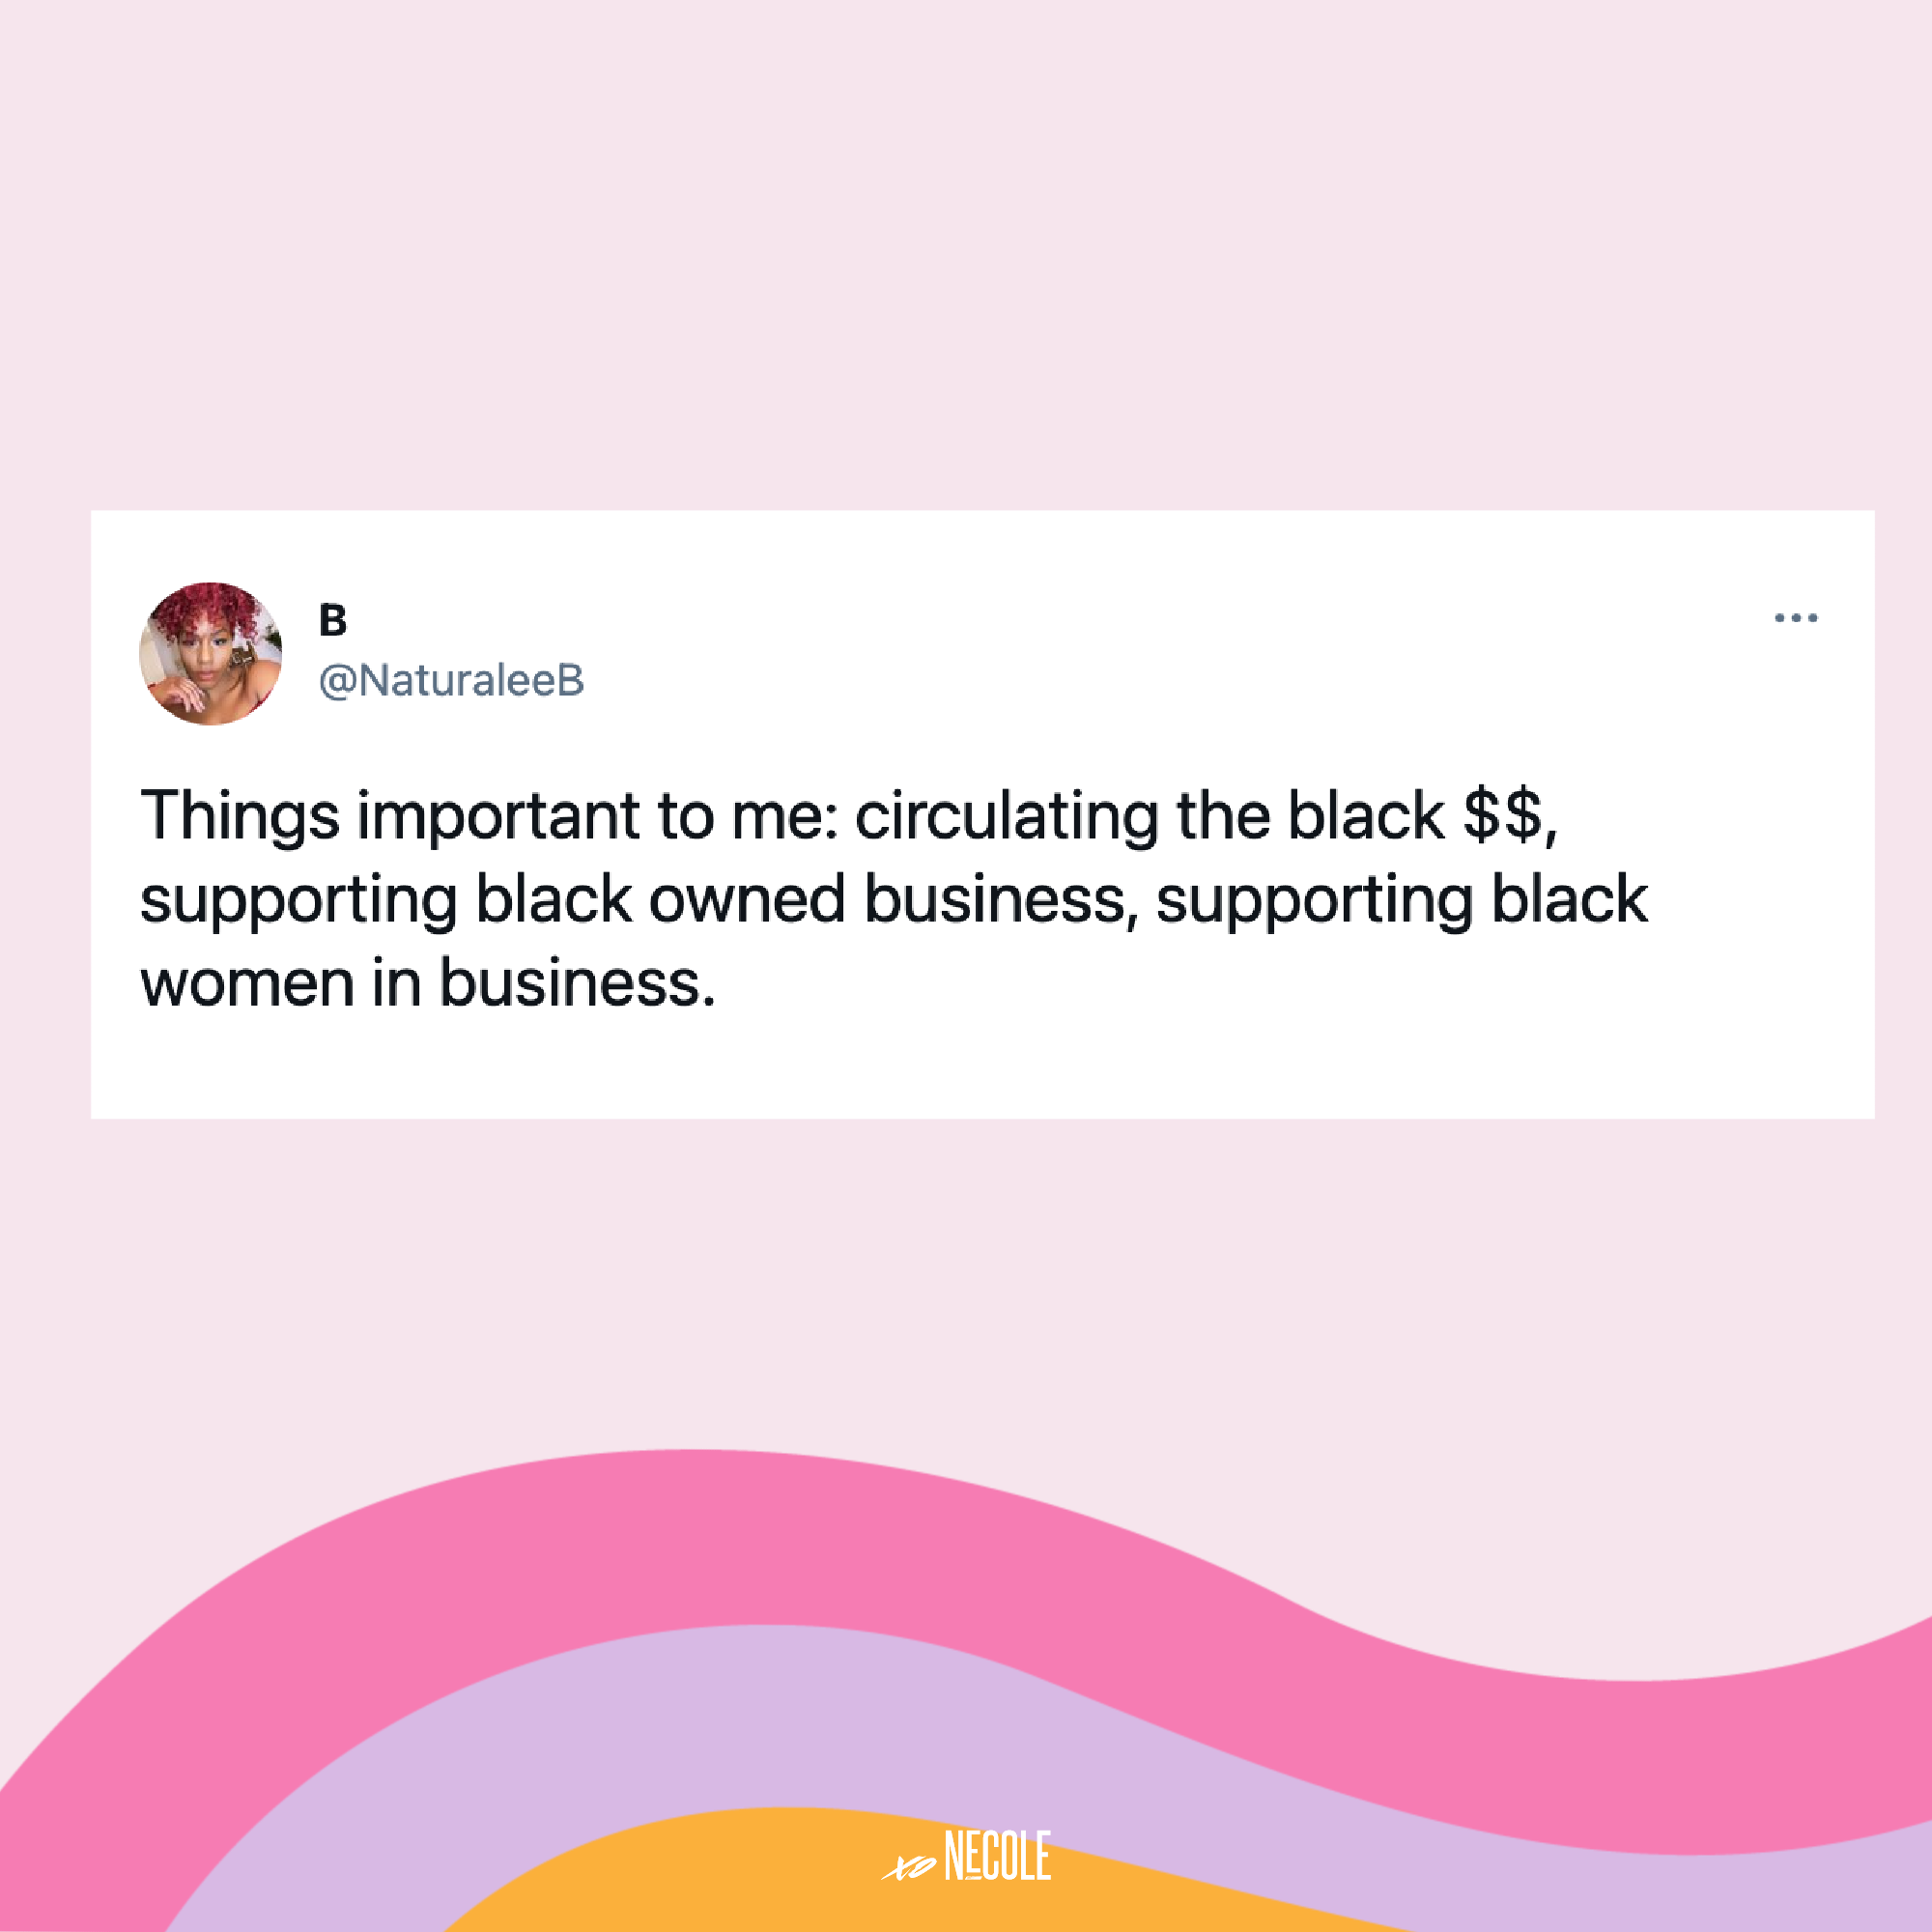 Things important to me: circulating the black $$, supporting black owned business, supporting black women in business.